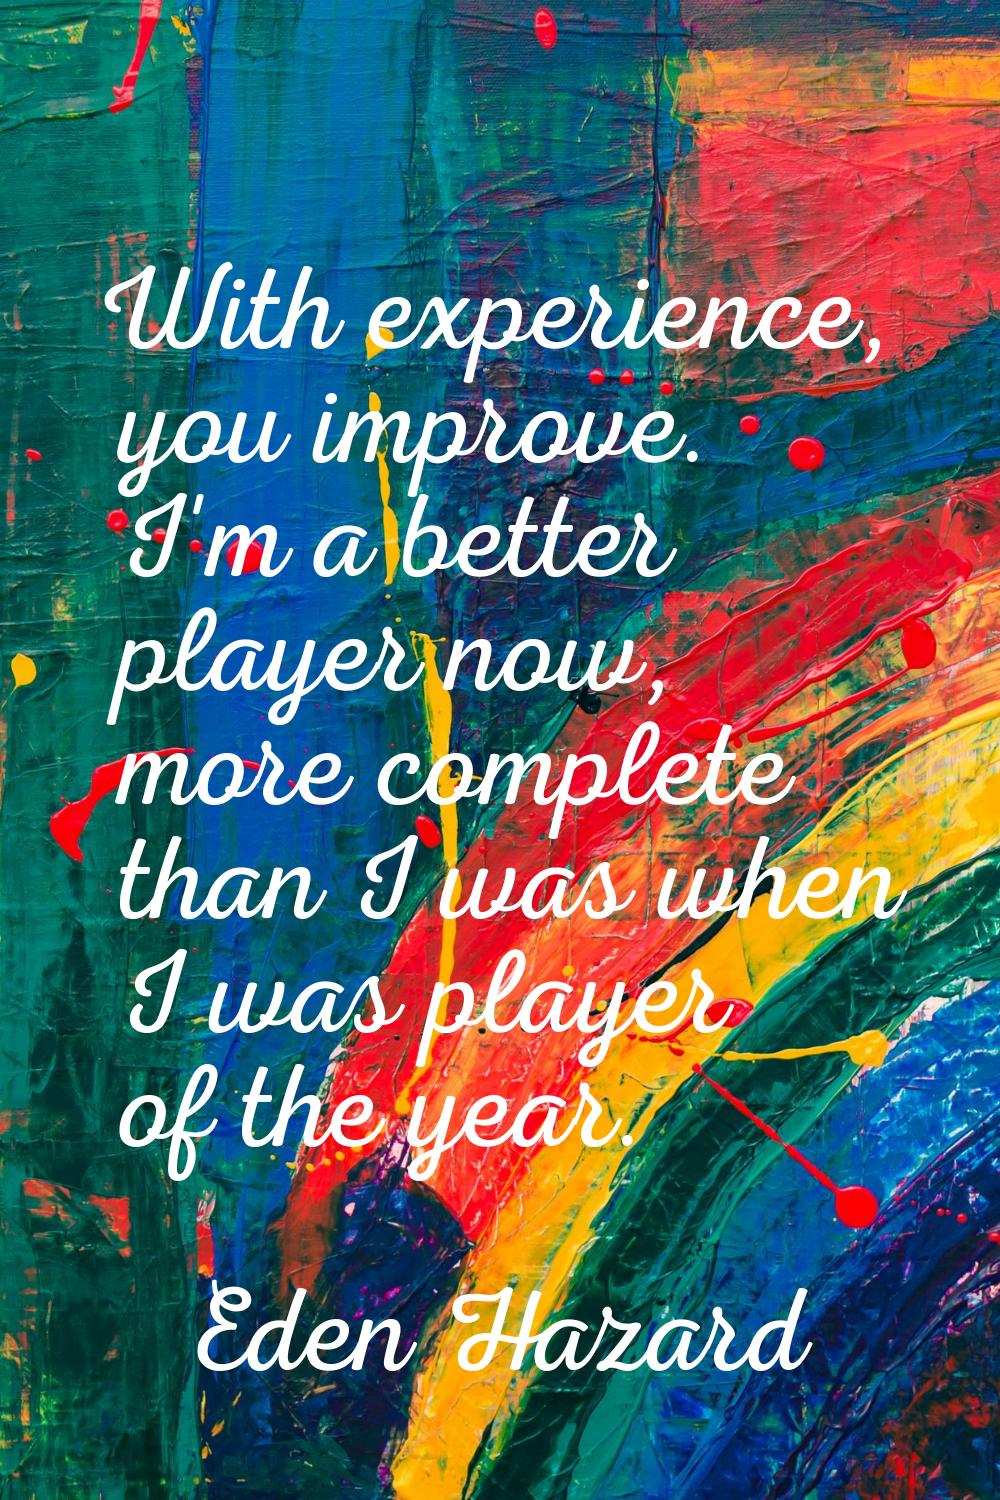 With experience, you improve. I'm a better player now, more complete than I was when I was player o